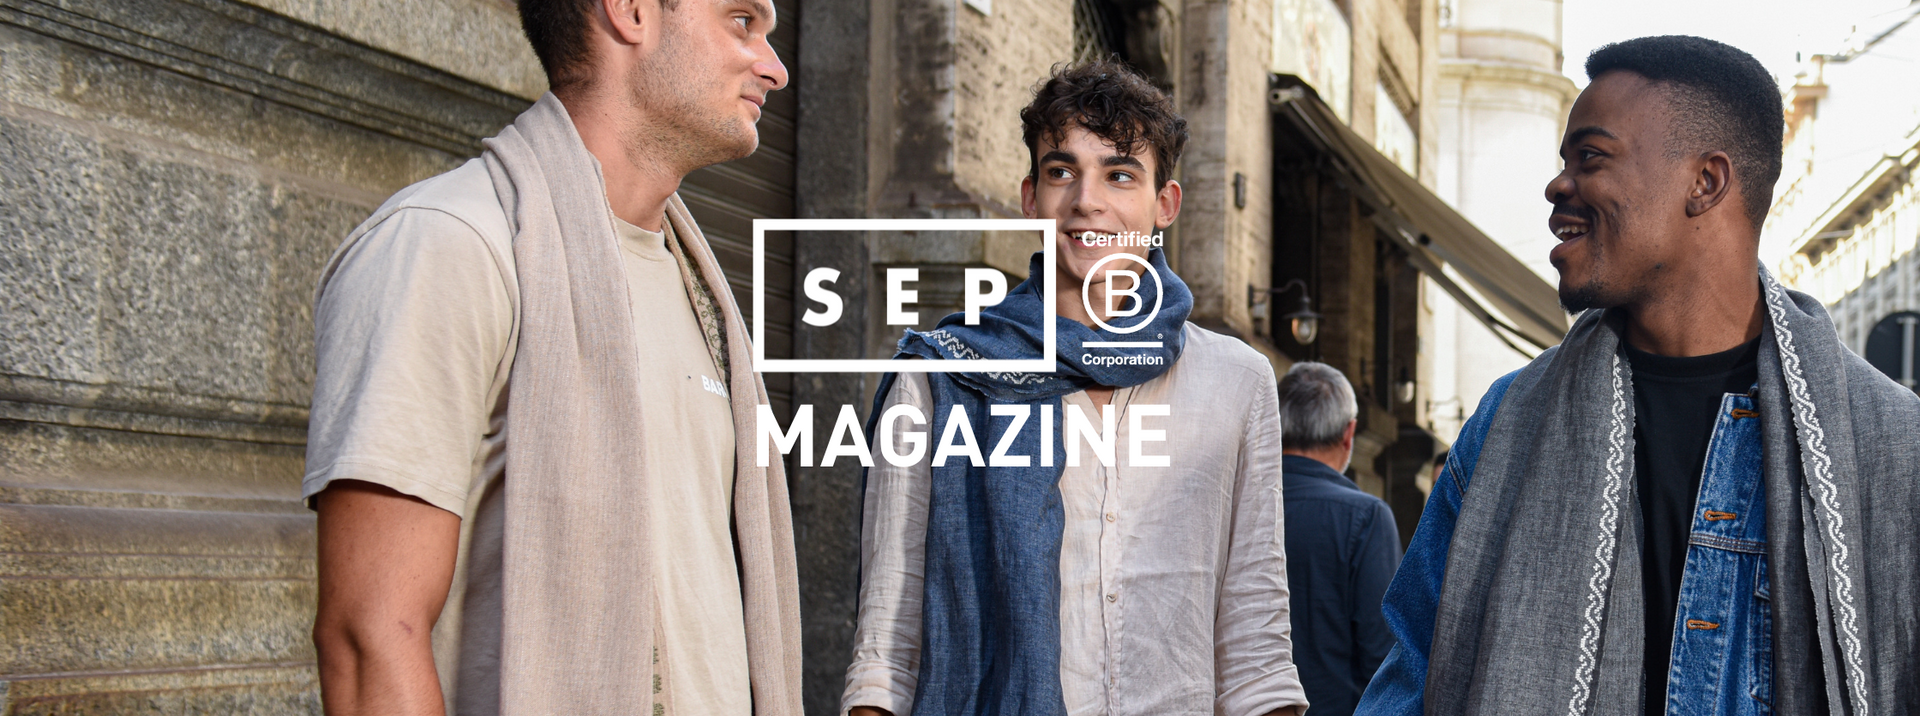 SEP Magazine Issue 02 | Discover Milan Old Town with SEP